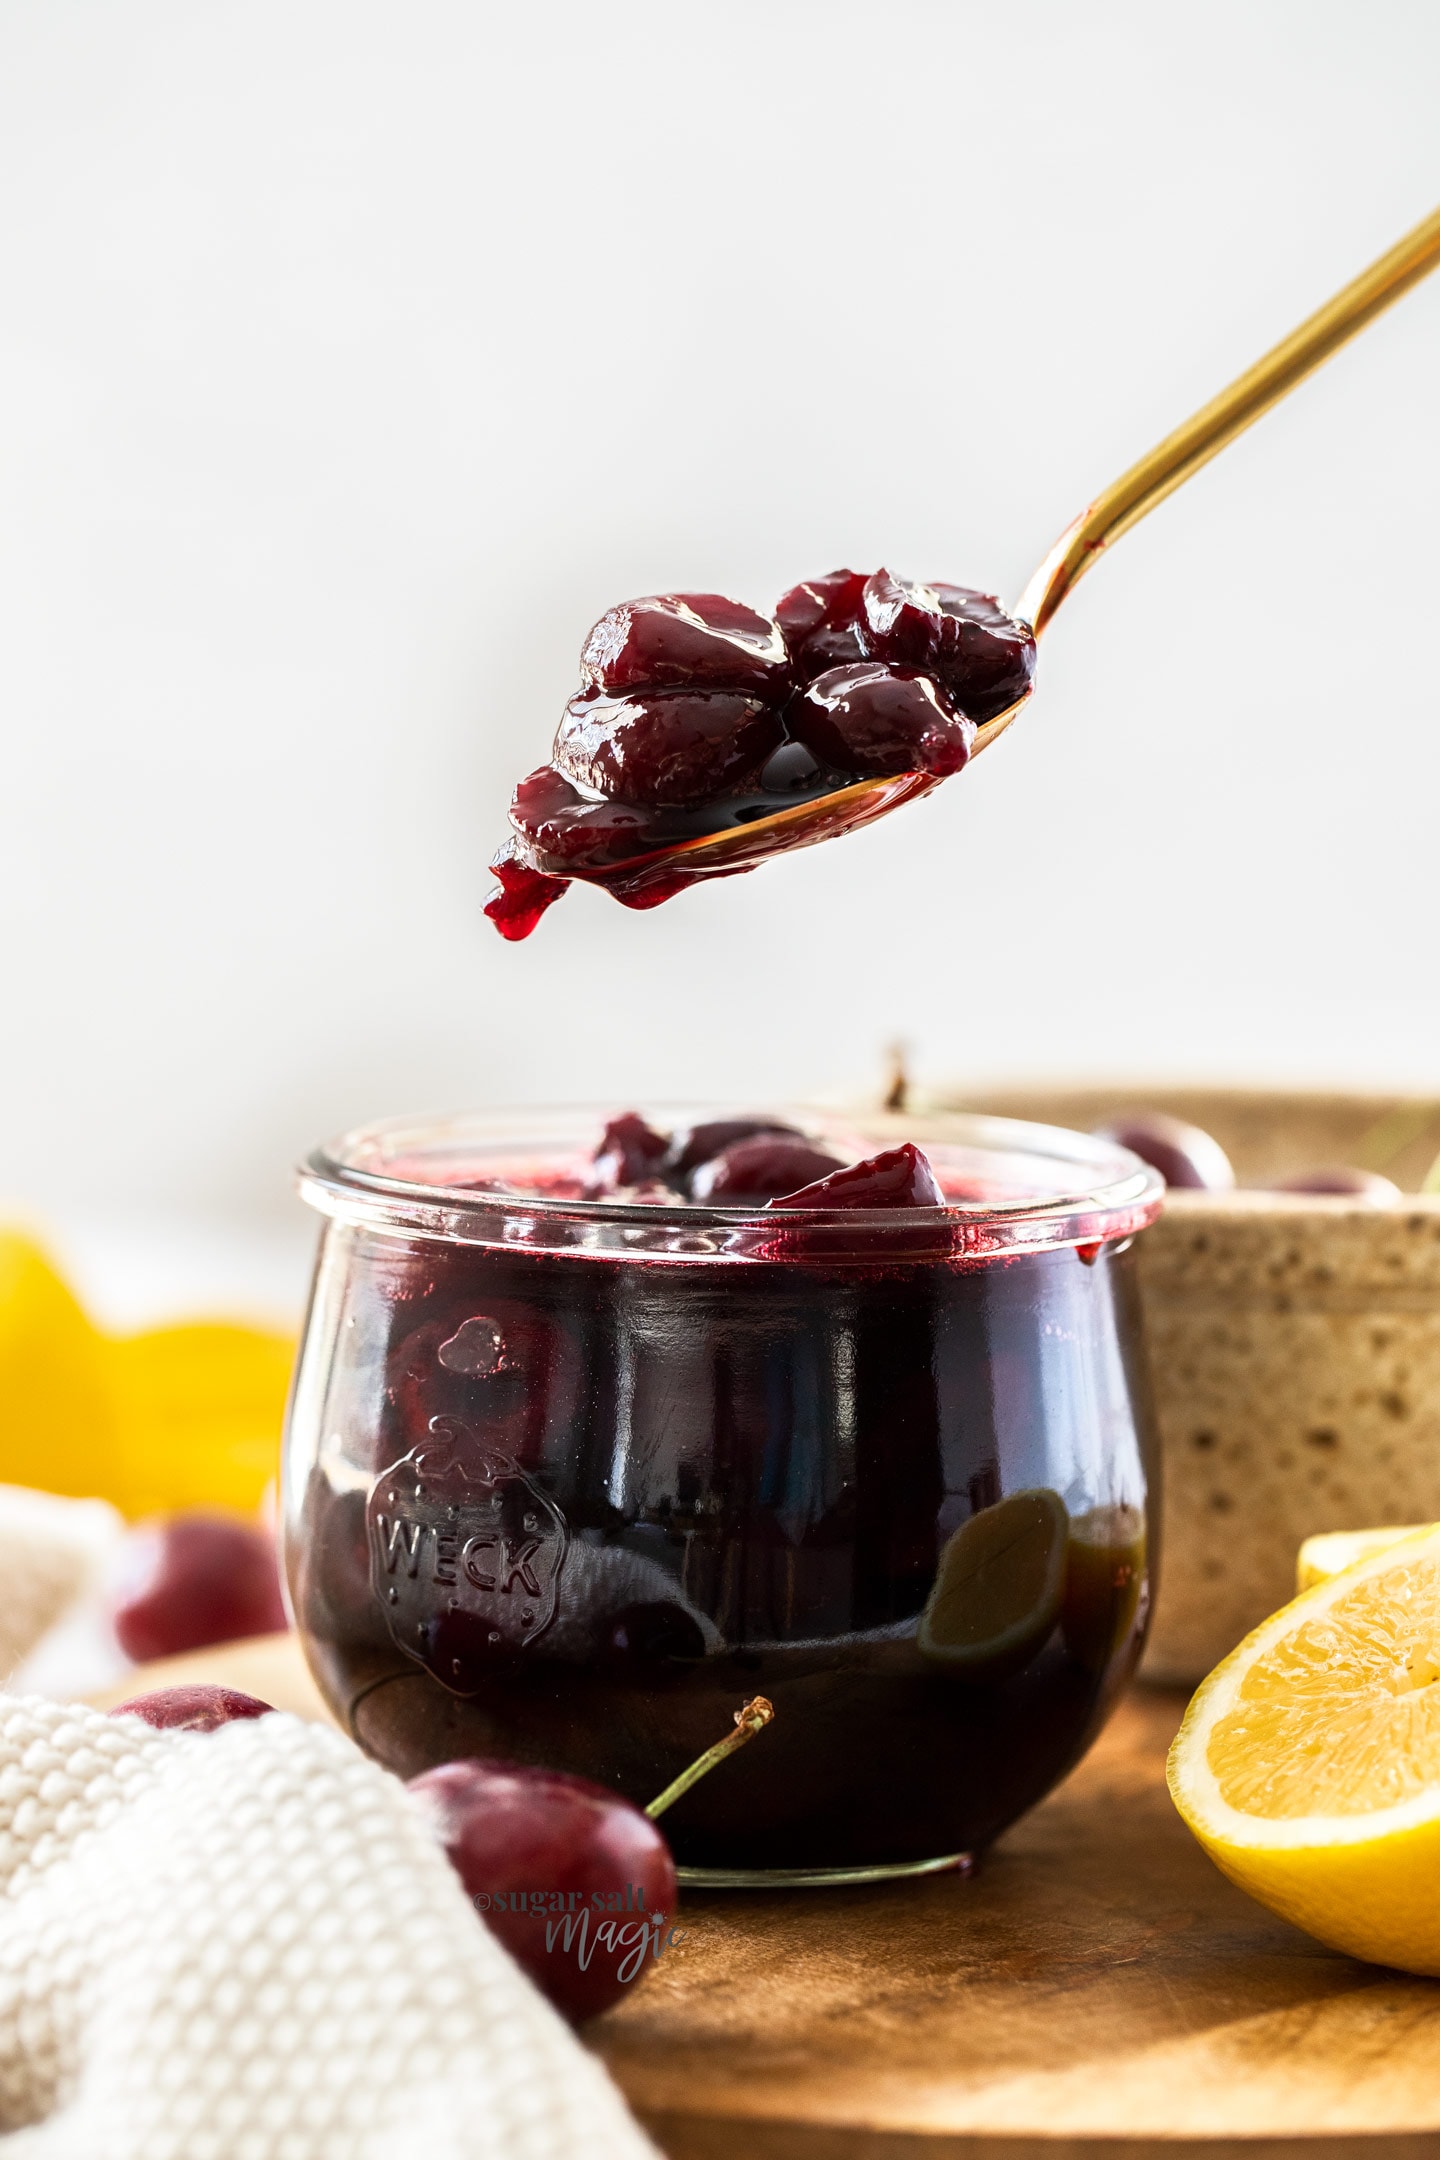 A gold spoon filled with cherry compote hovering over a jar full of it